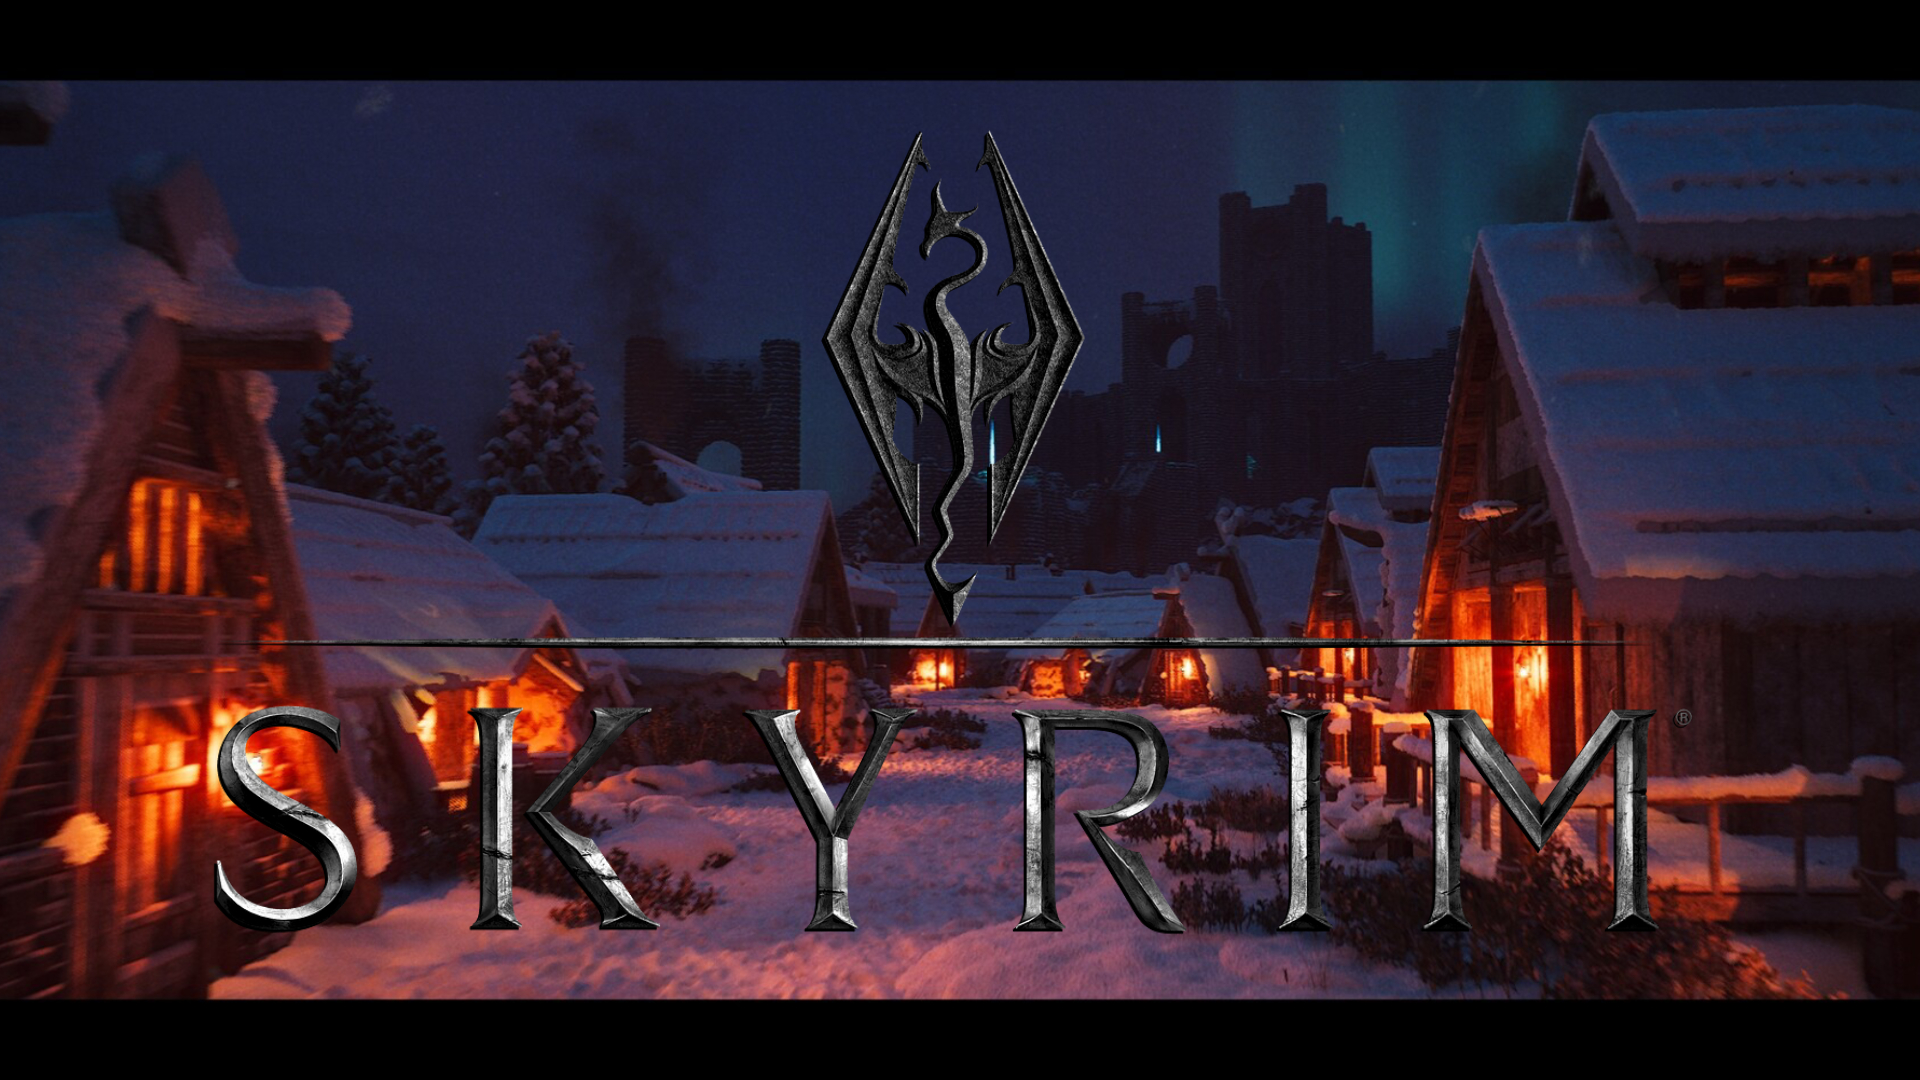 Skyrim's iconic location looks exceptional in Unreal Engine 5